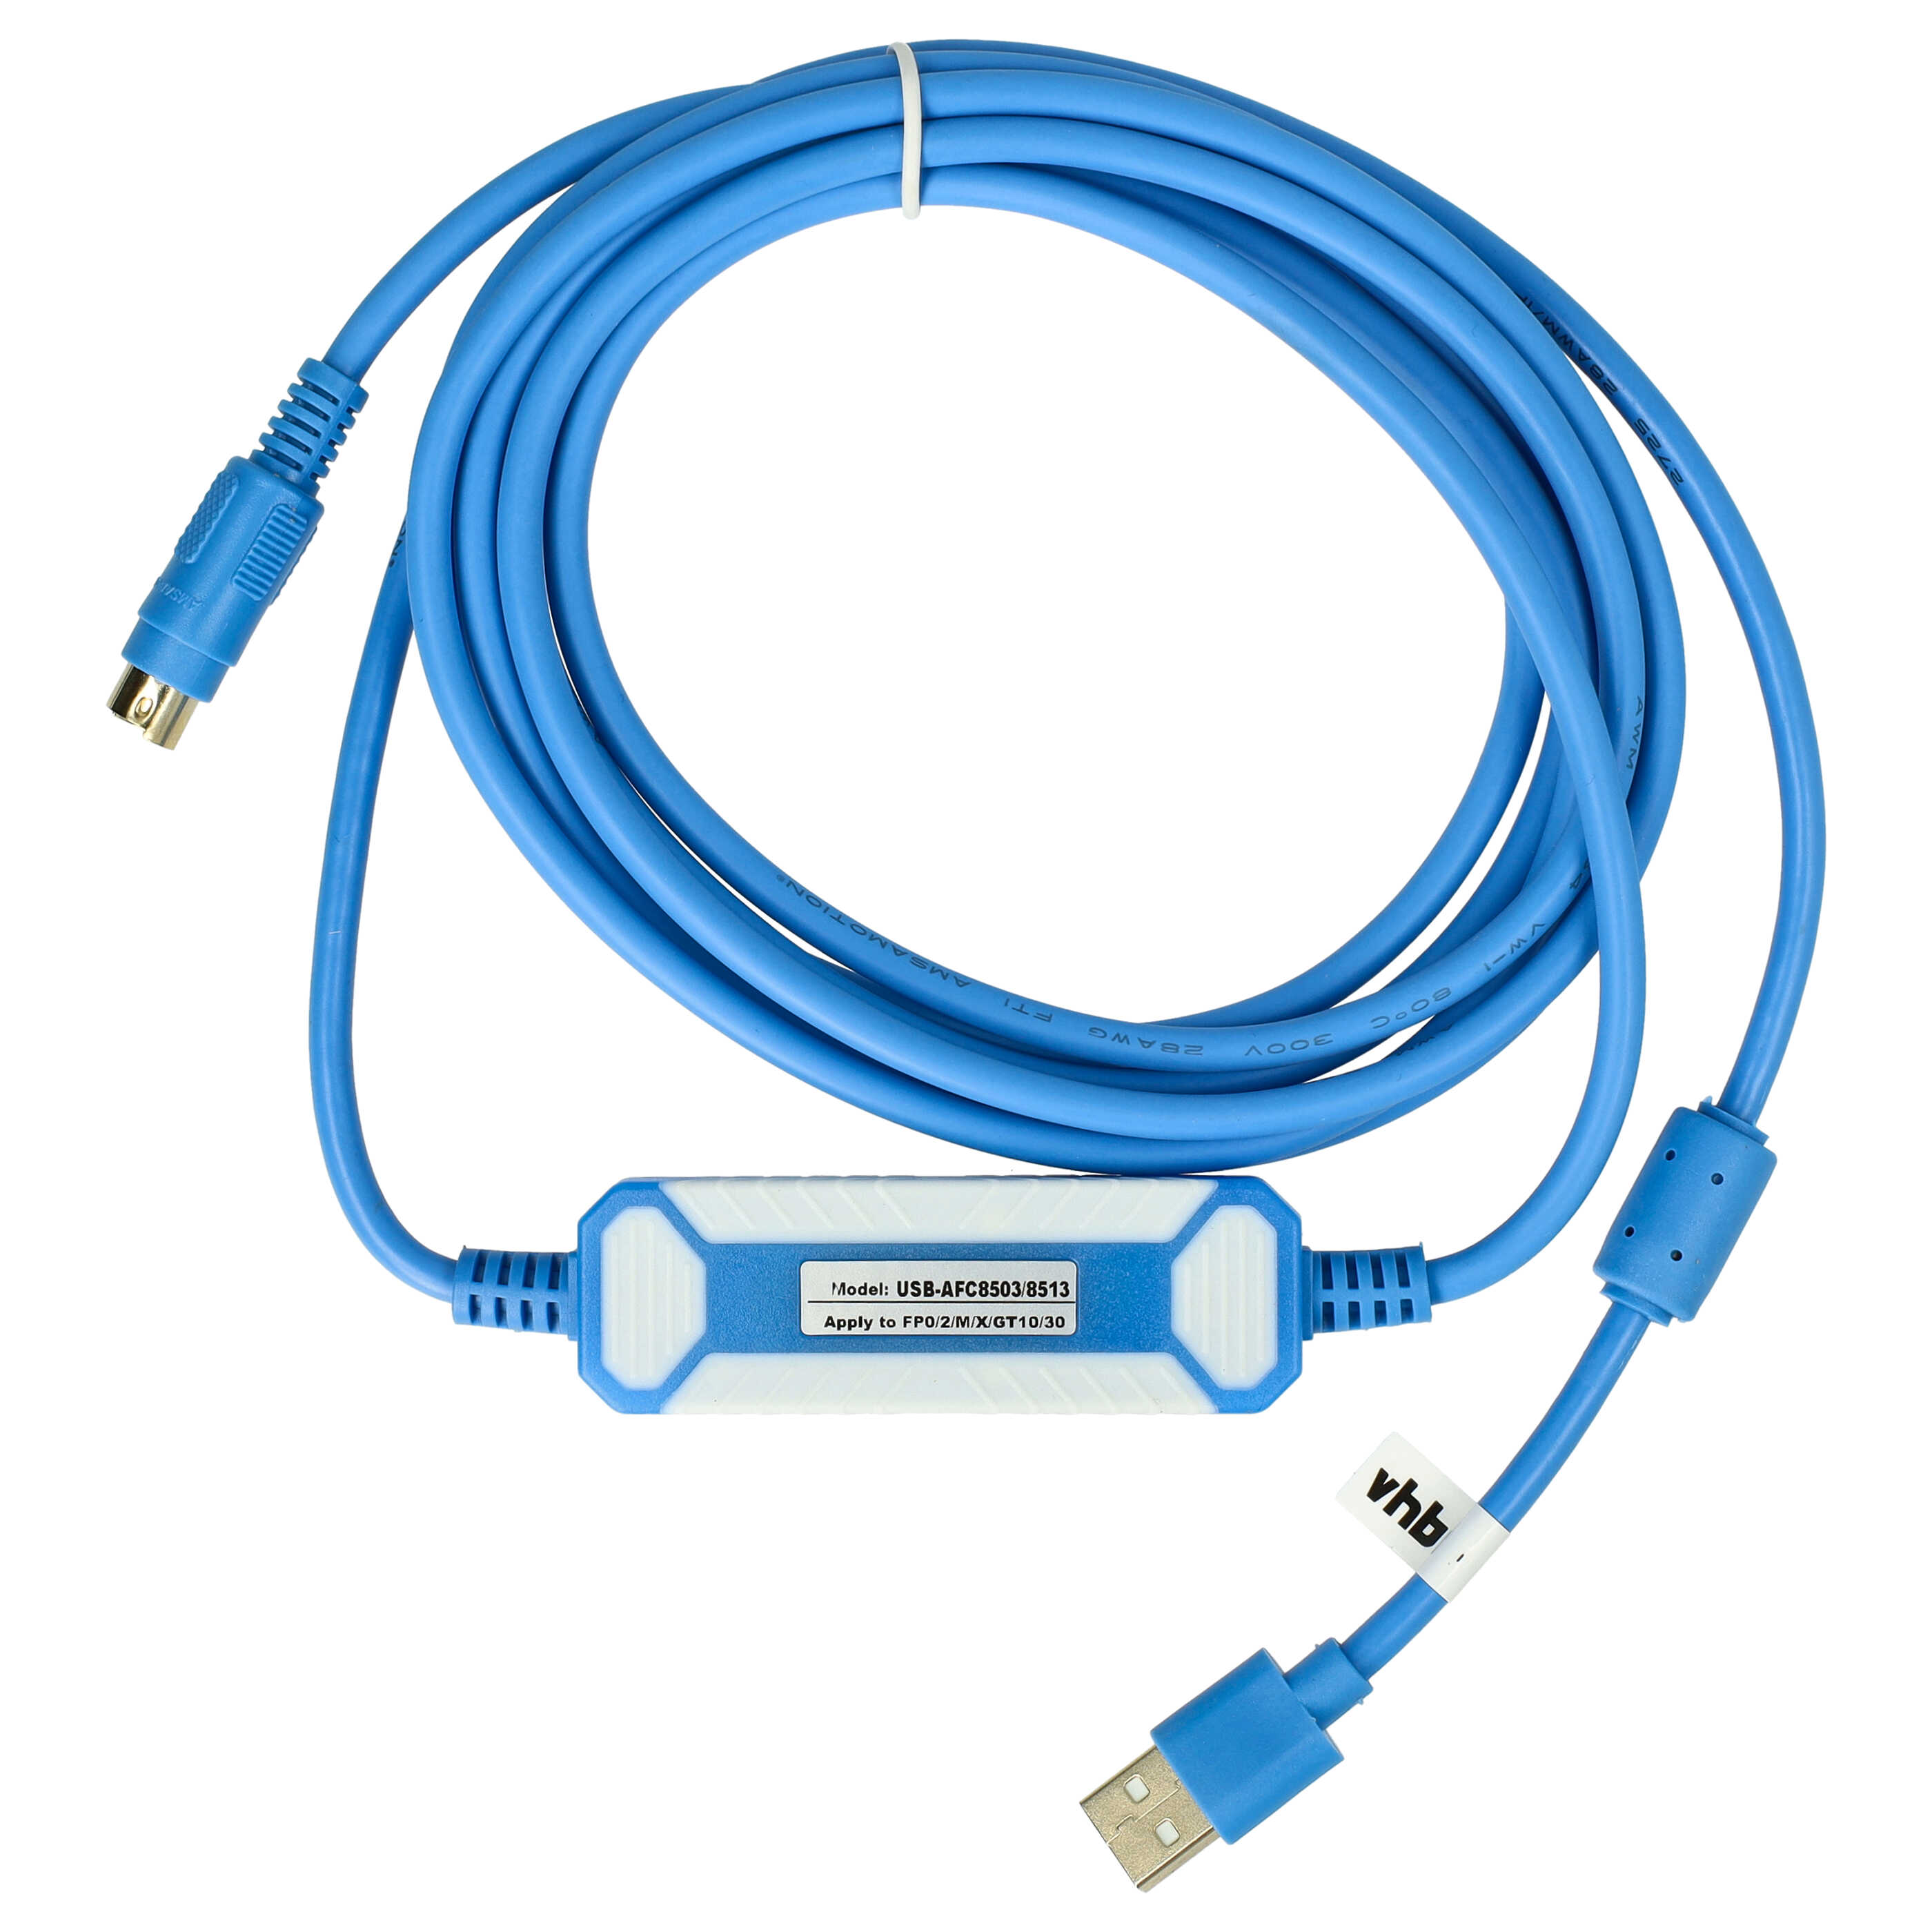 Programming Cable suitable for Fatek Facon FBS-SeriesRadio